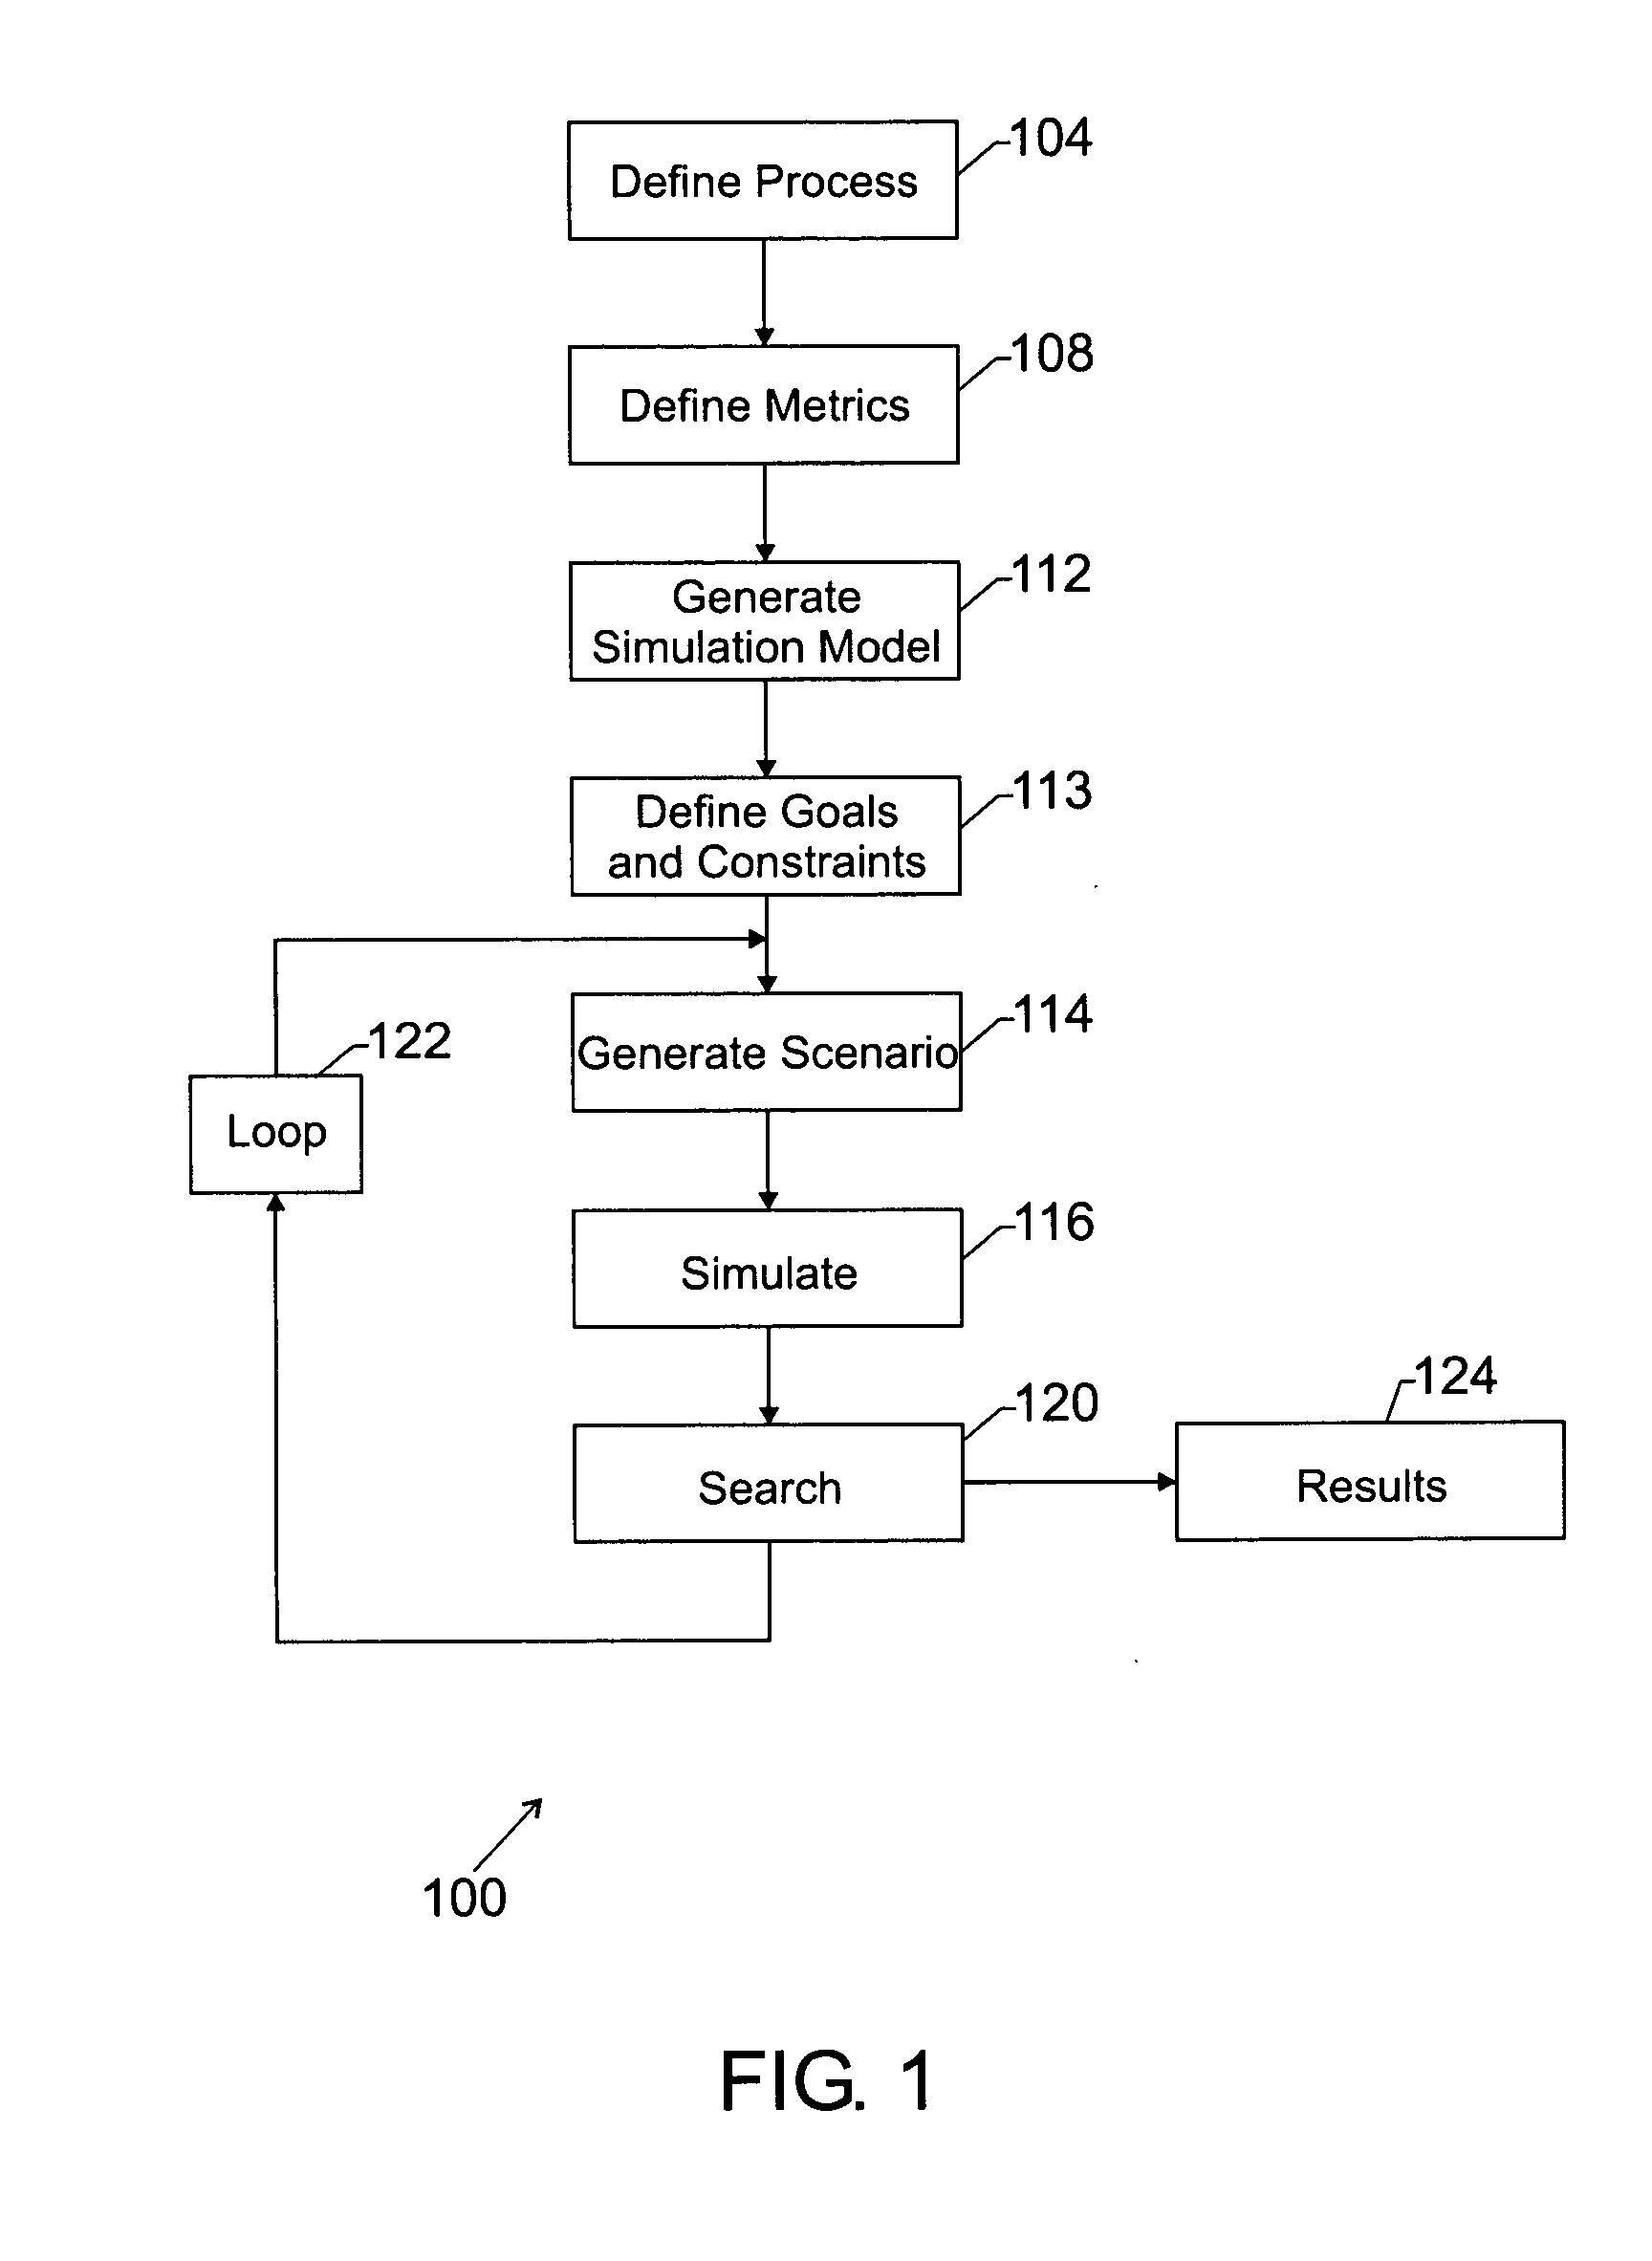 System and method for determining an optimized process configuration